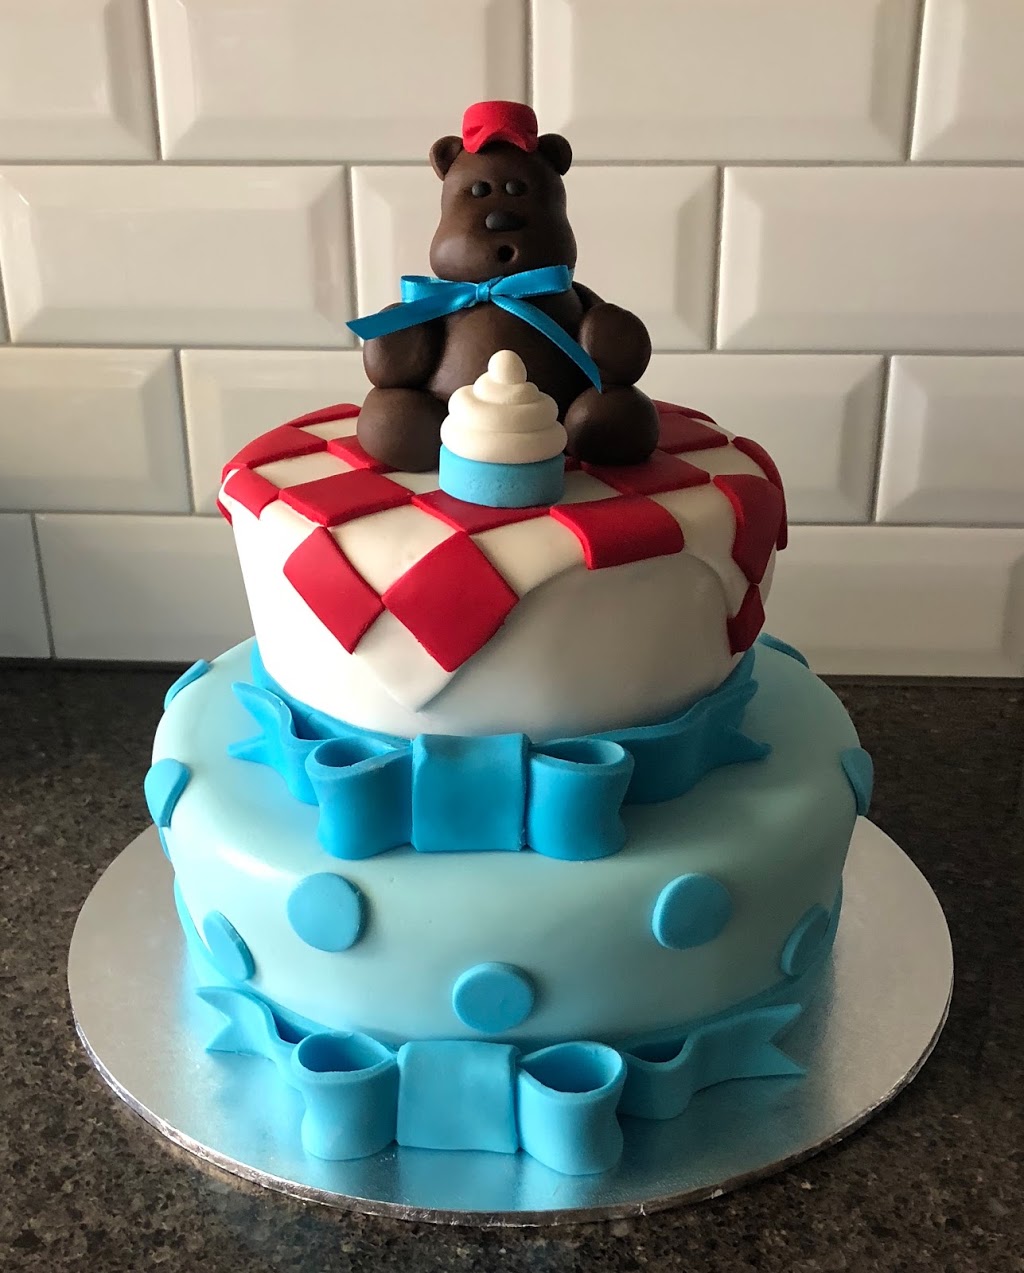 Tracey’s Creations Cakes | bakery | 161 Clancy Rd, Gawler Belt SA 5118, Australia | 0415990600 OR +61 415 990 600